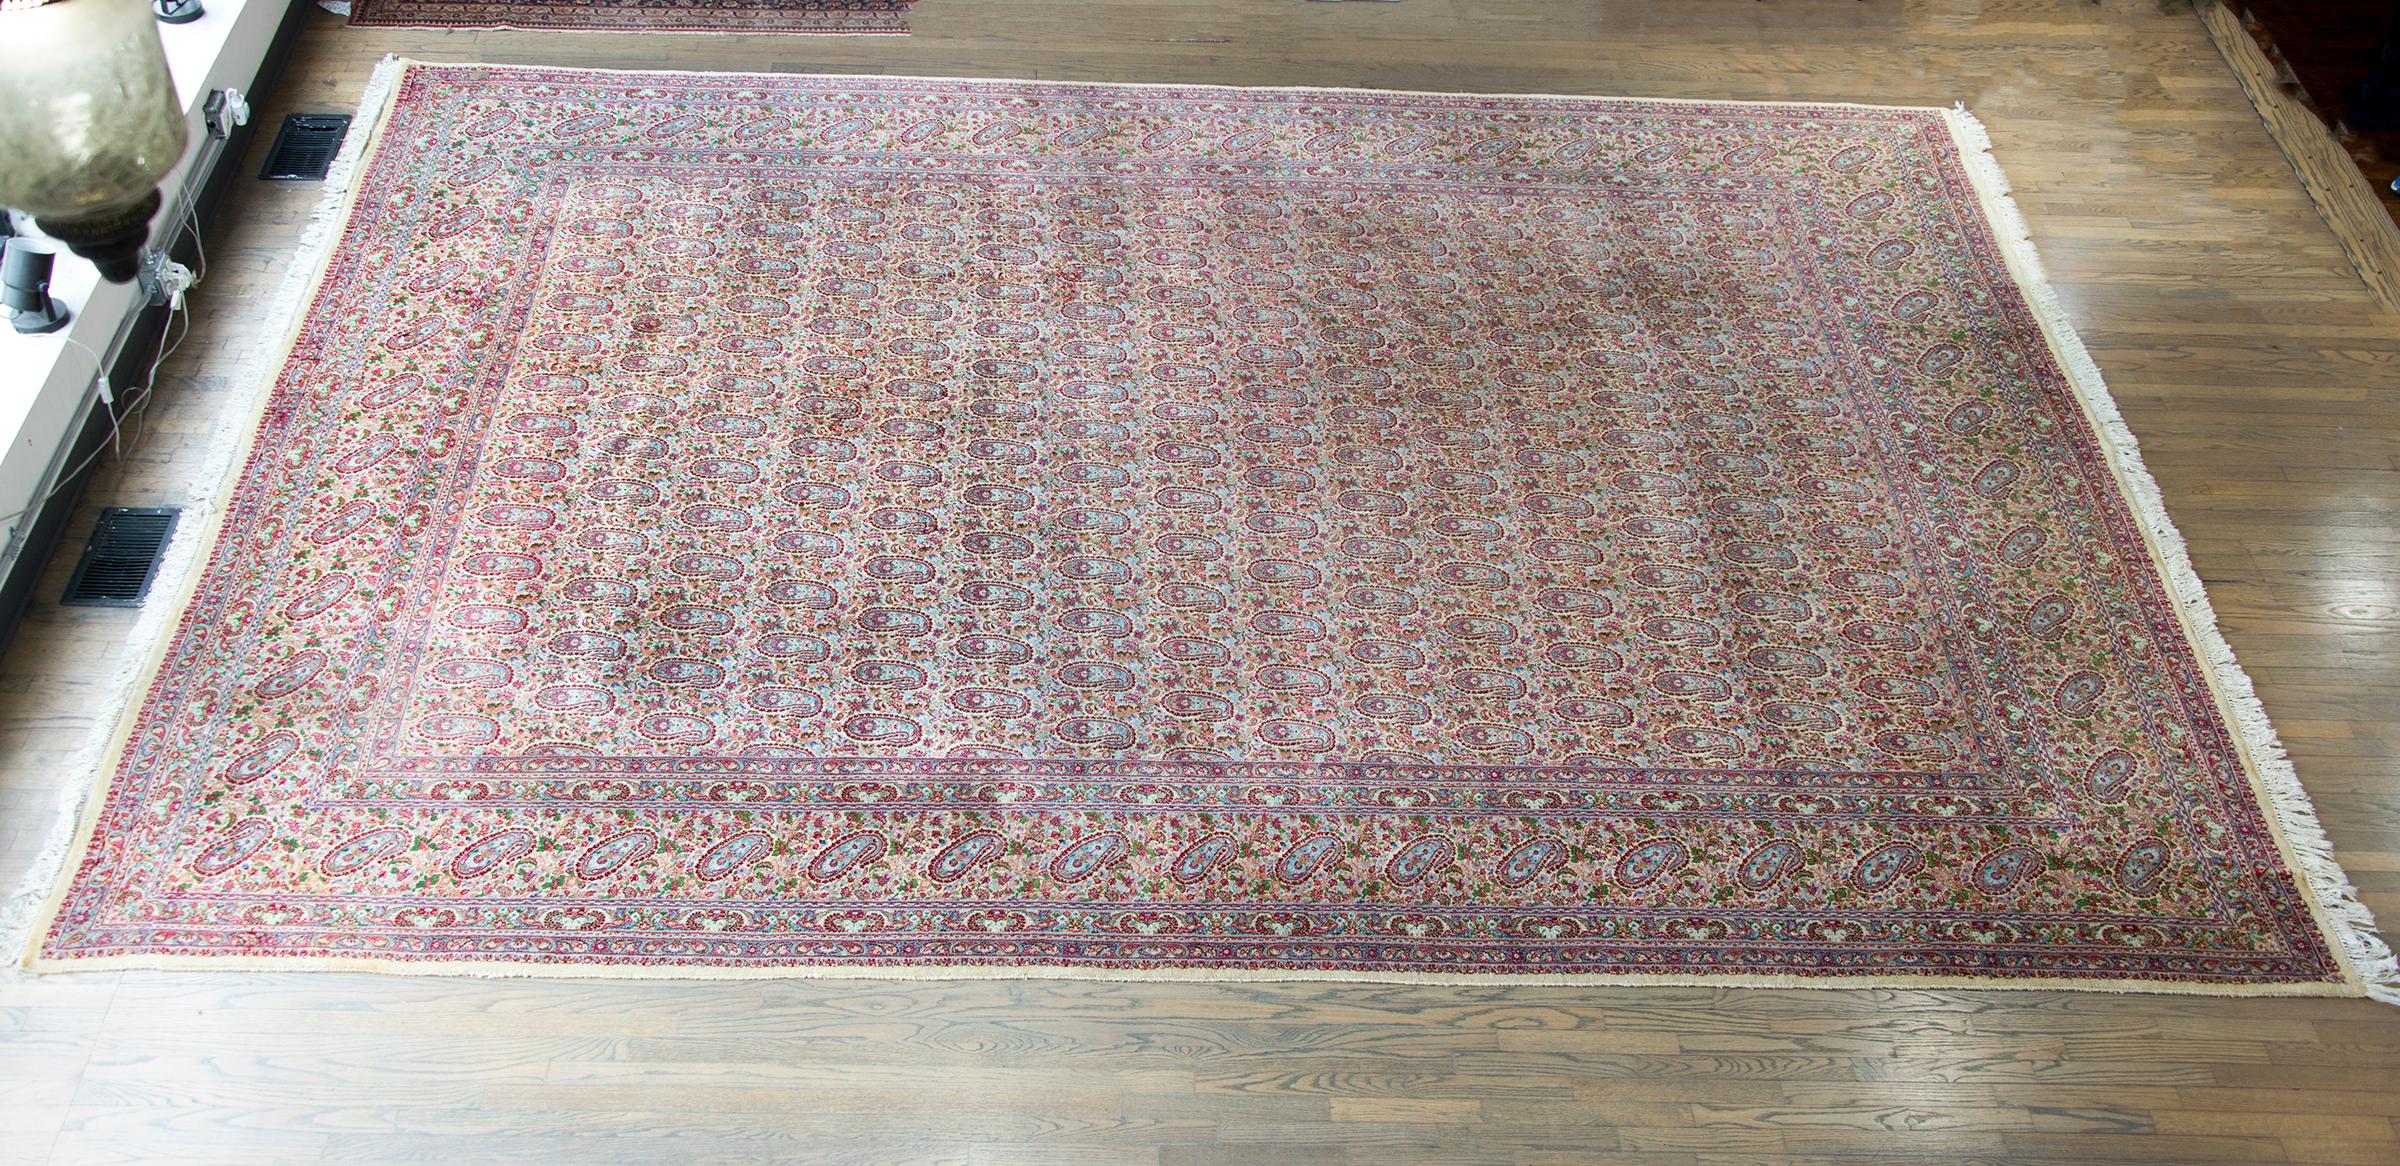 A gorgeous early 20th century Persian Kirman rug with an all-over paisley and petite floral pattern woven in traditional Kirman colors including pinks, cranberries, light and dark indigo, and golds, and all framed by a matching large paisley pattern.